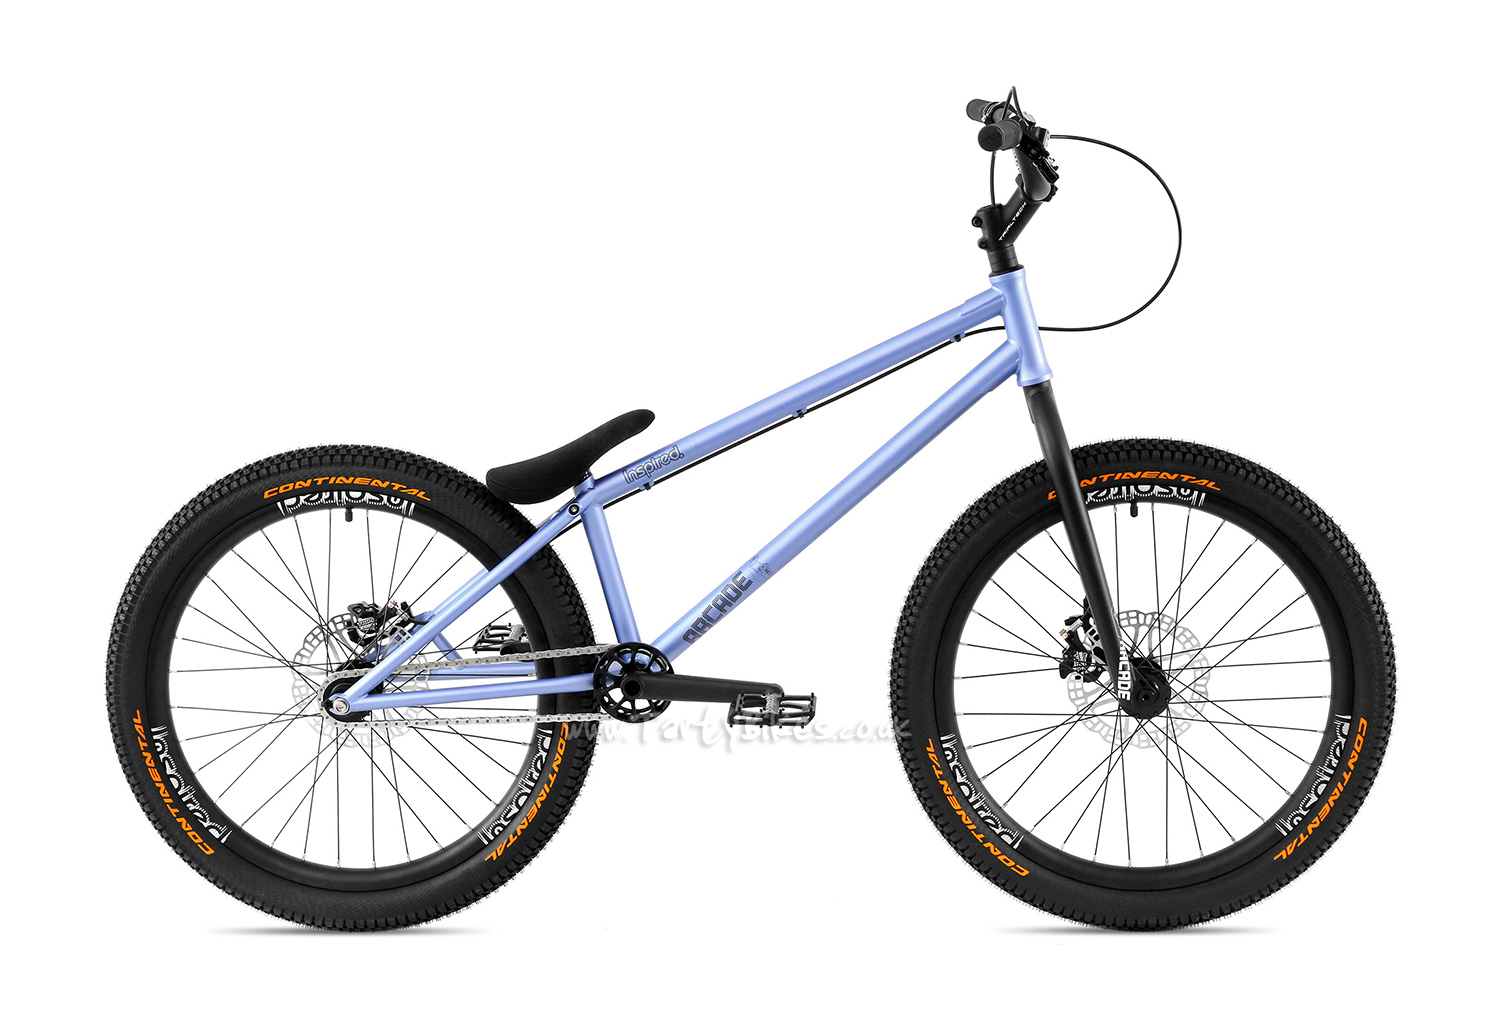 inspired trial bikes